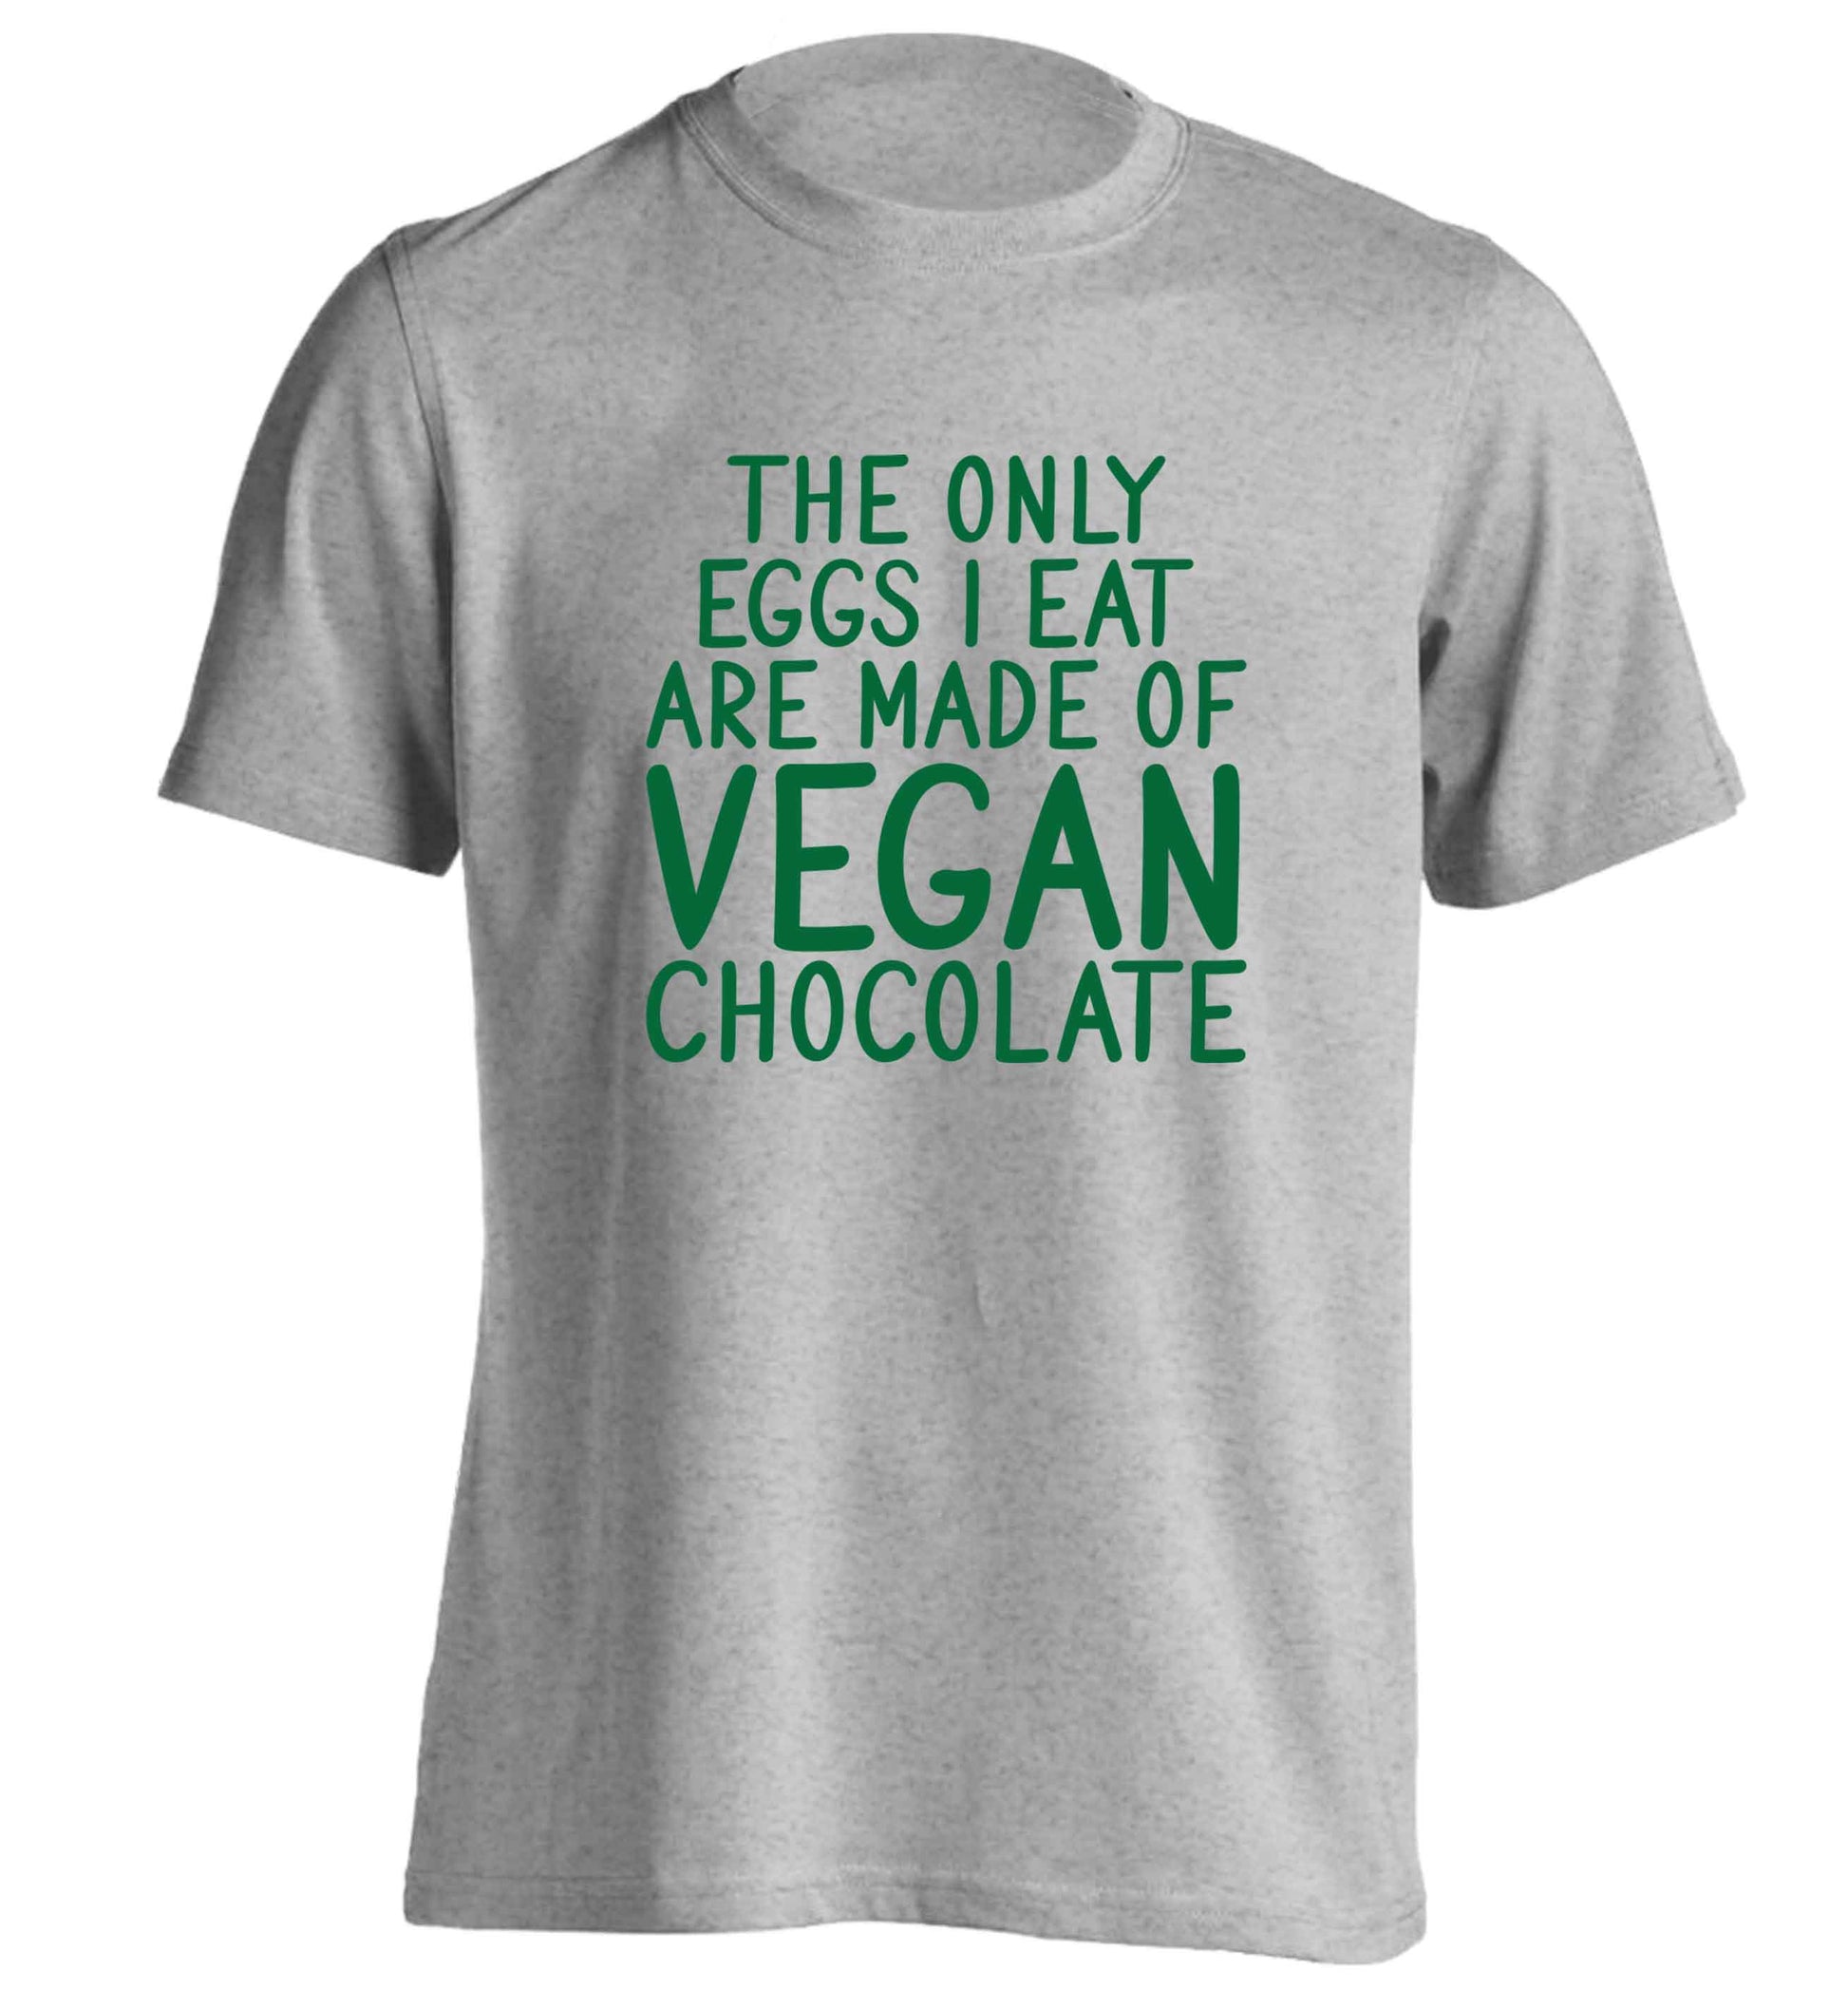 The only eggs I eat are made of vegan chocolate adults unisex grey Tshirt 2XL